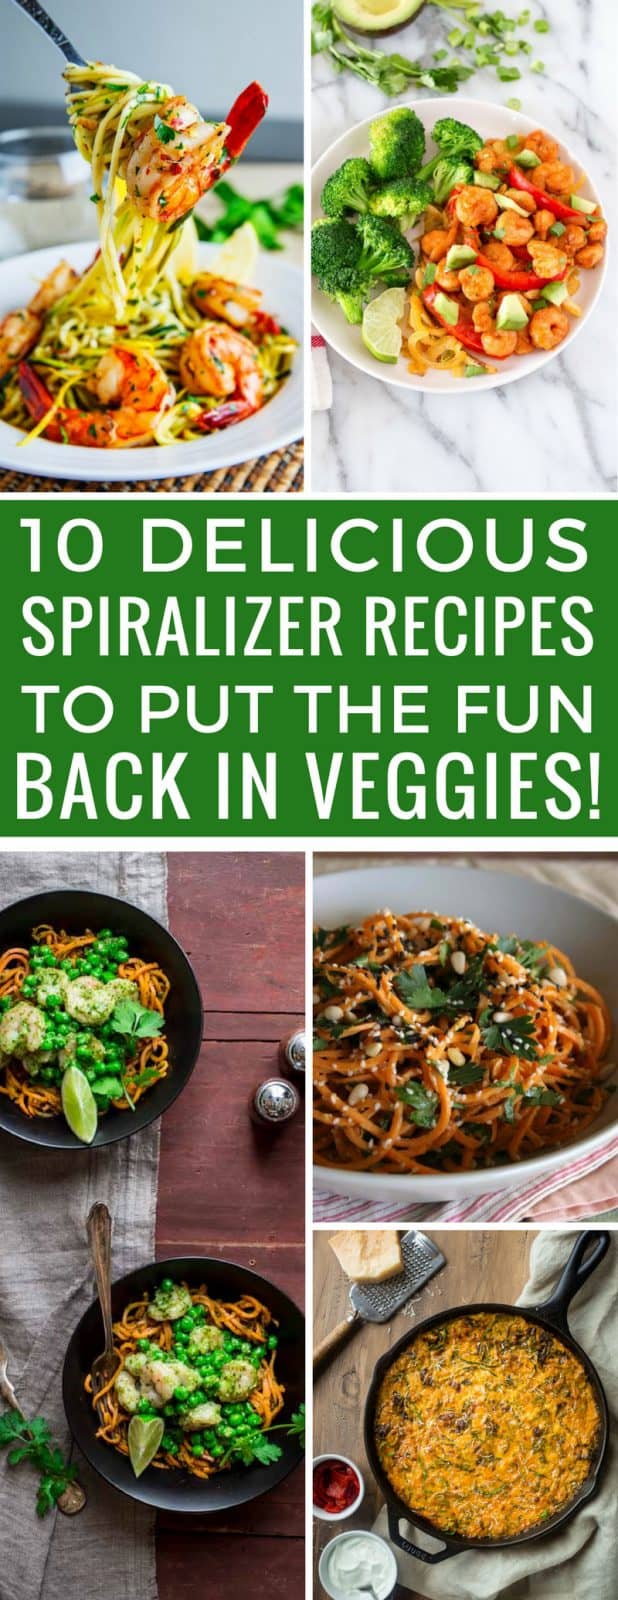 10 of the Best Spiralizer Recipes that Put the Fun into Veggies!